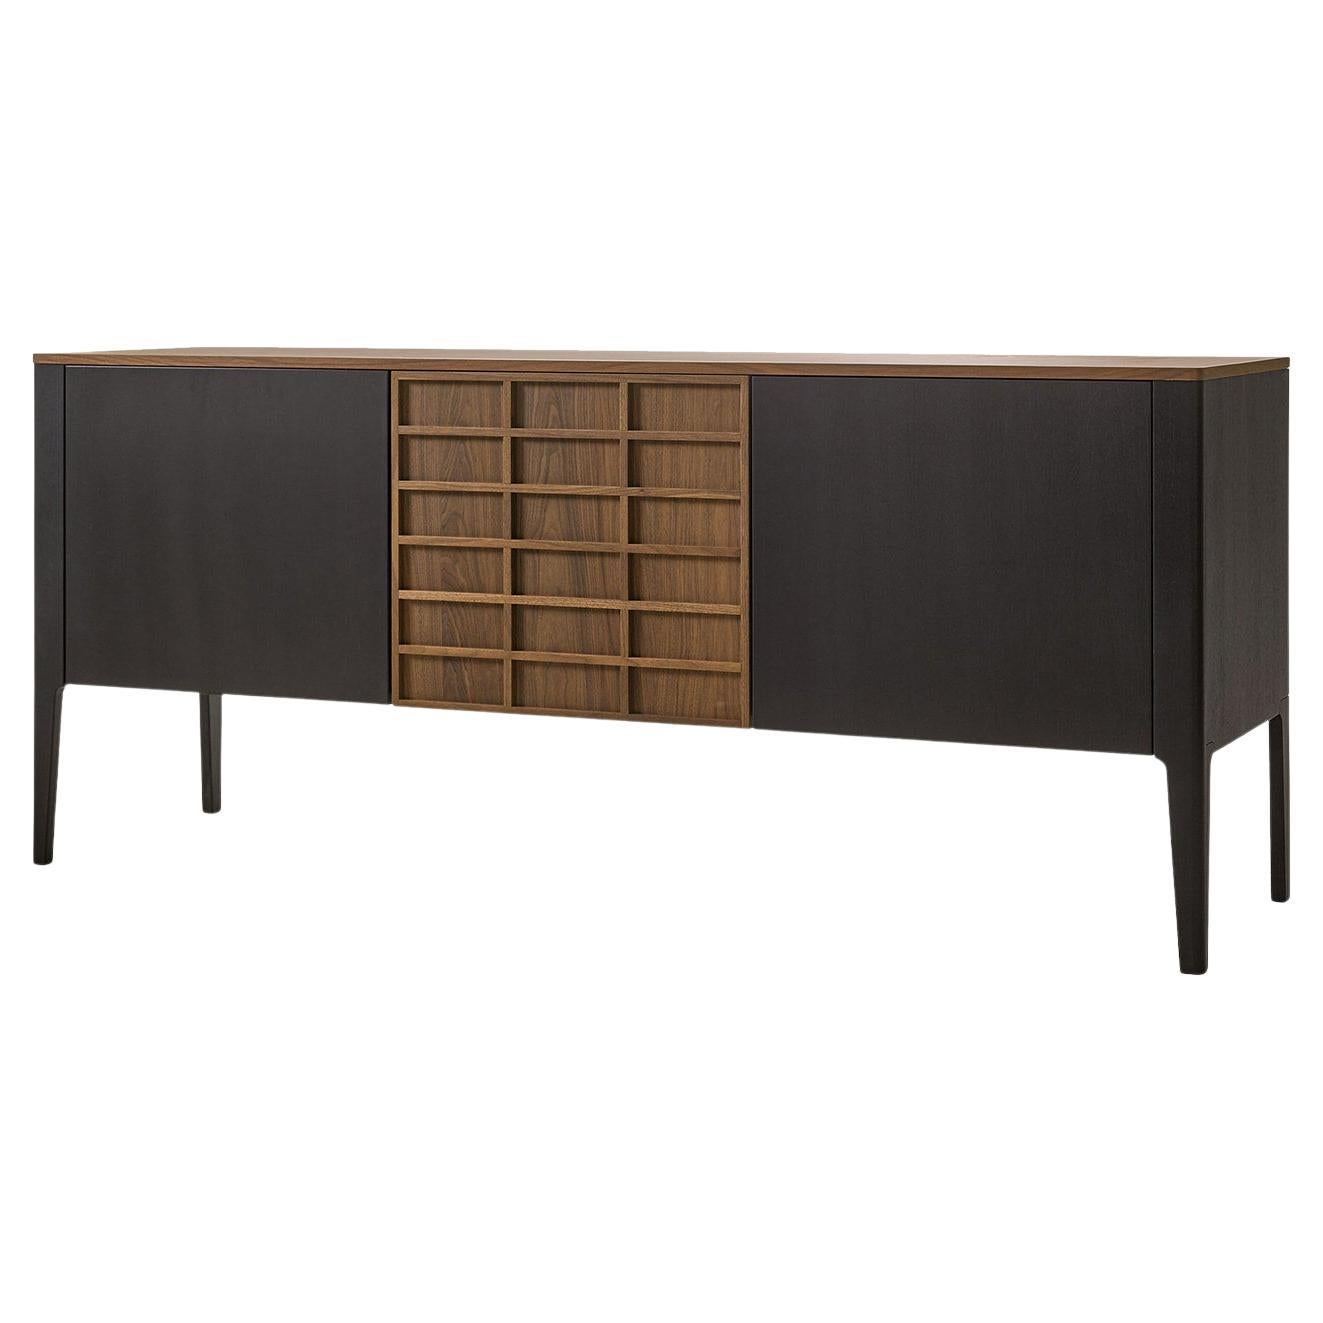 Singapore Bicolor Sideboard For Sale